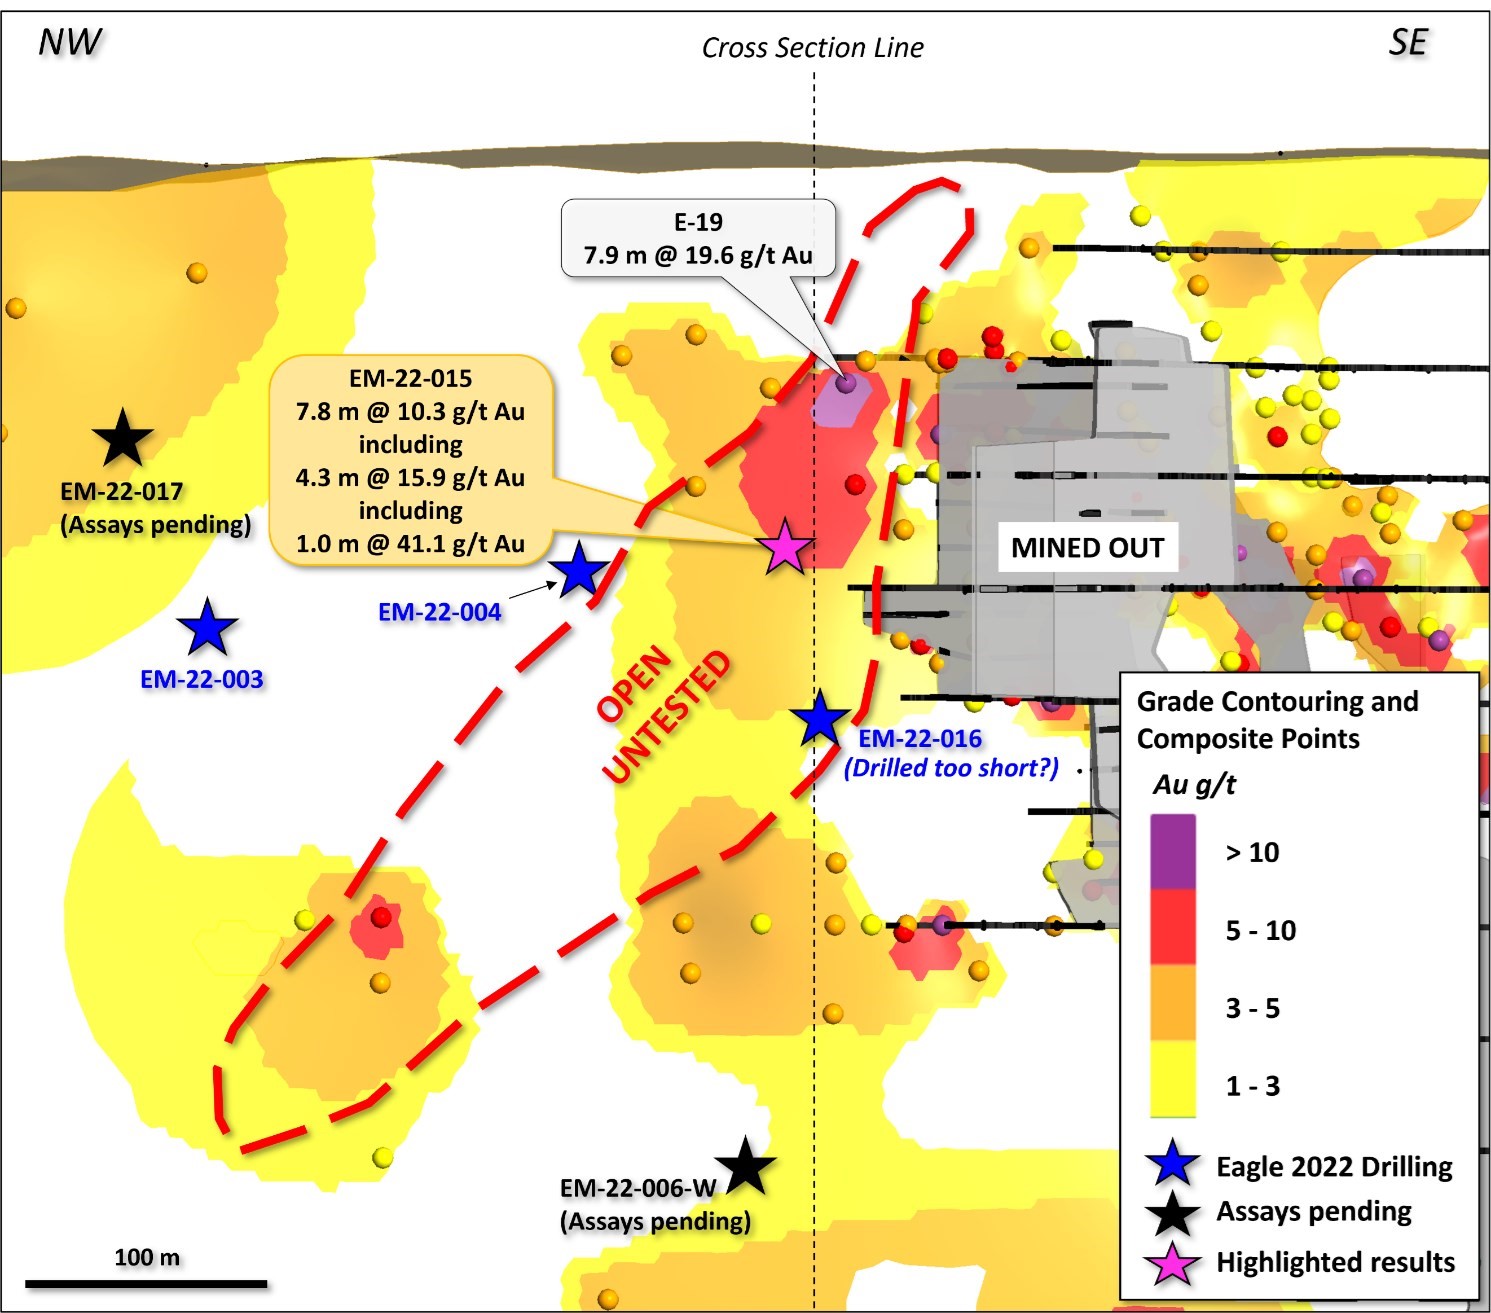 NE-looking long section (55 m total width) highlighting the location of the EM-22-015 intercept (10.3 g/t Au over 7.8 m) relative to pre-existing grade contouring in the North Mine Horizon. Note the open area extending down-plunge from hole E-19 (19.6 g/t Au over 7.9m).